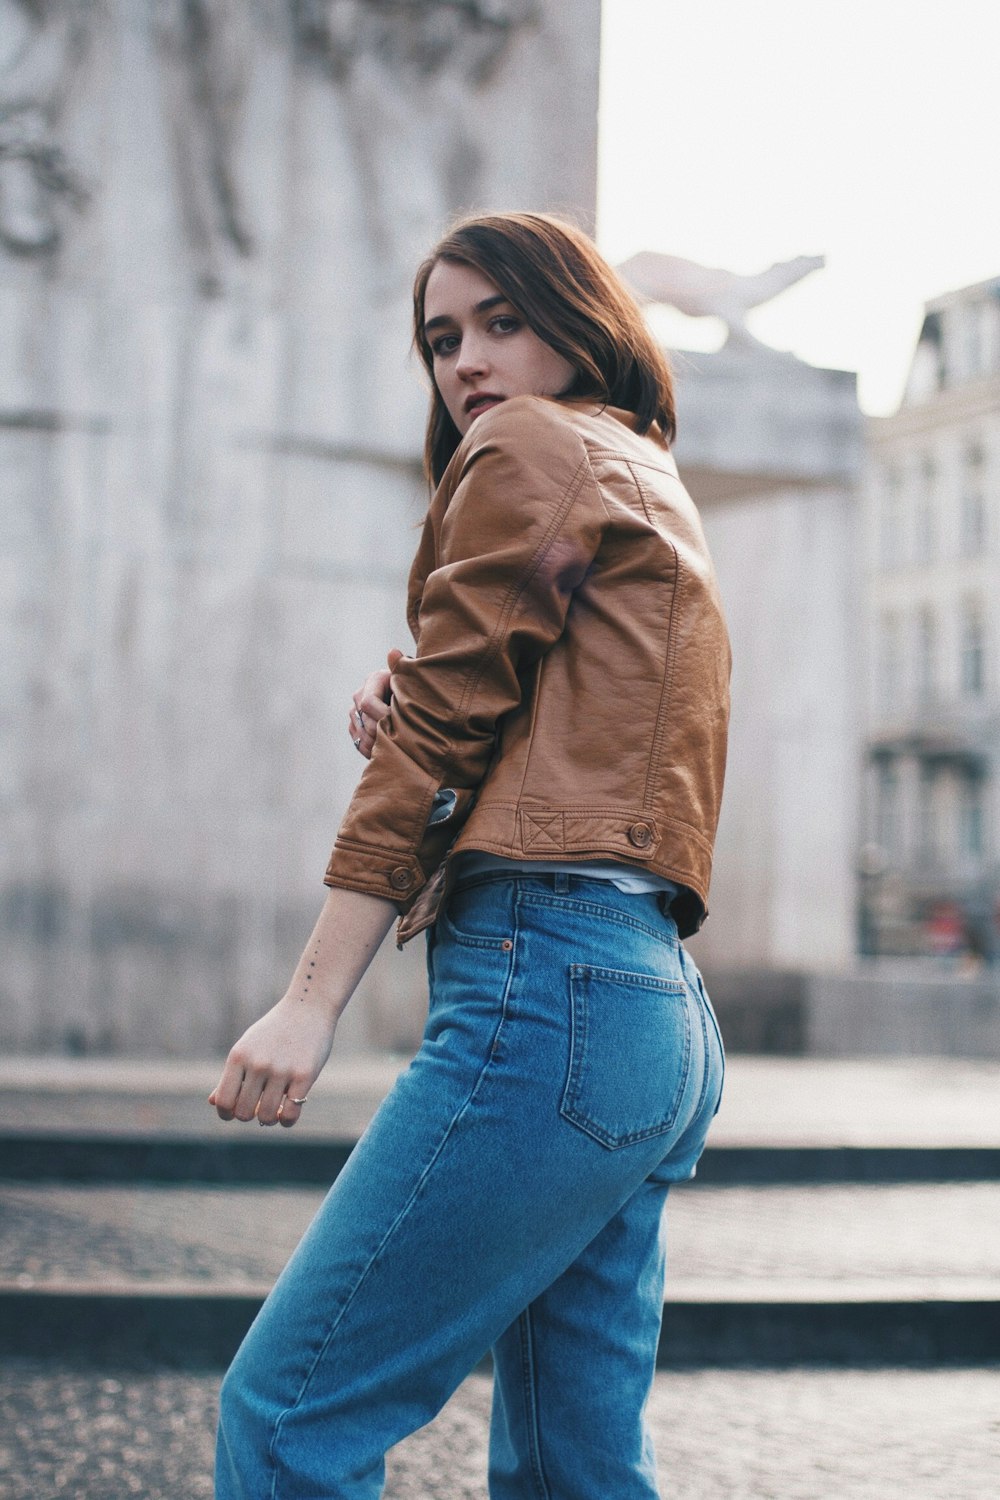 selective focus photography of woman in brown leather jacket stands near concrete building